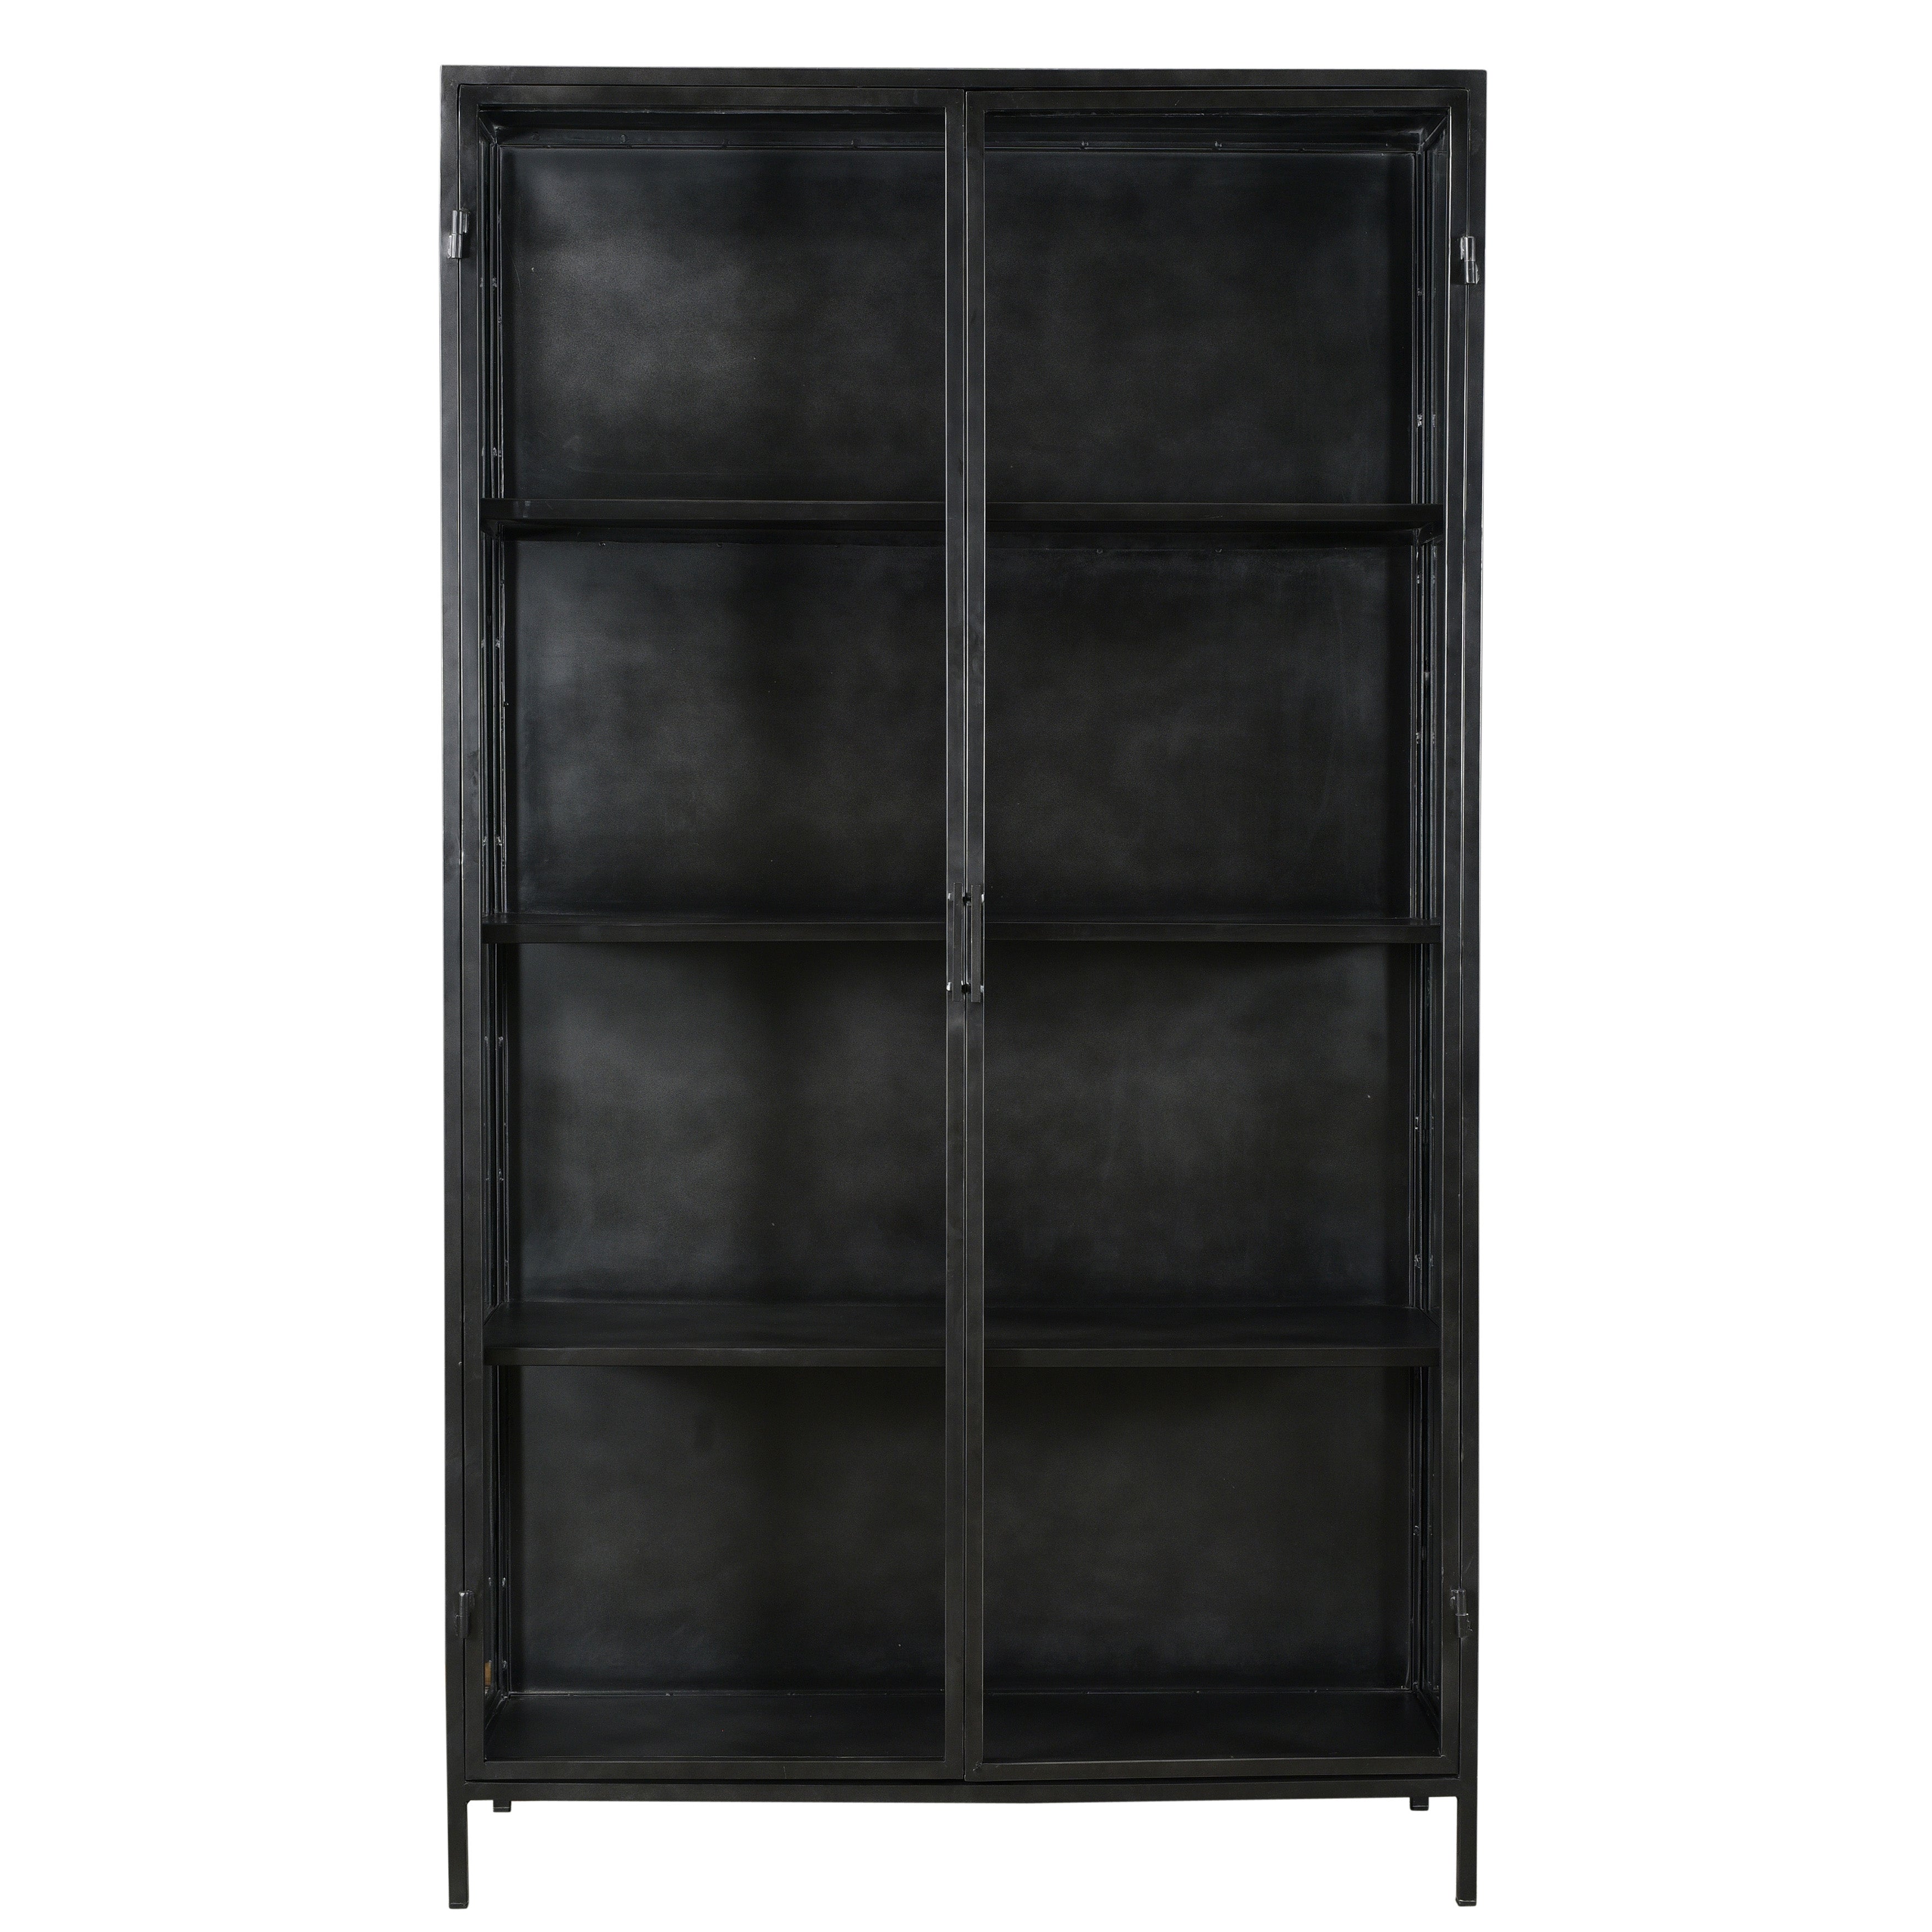 With a touch of vintage industrial style and personality, this 78” tall cabinet will add flair to your home. Designed on a brushed gunmetal, iron frame with glass doors and side panels that give view to four shelf spaces. Amethyst Home provides interior design, new home construction design consulting, vintage area rugs, and lighting in the Kansas City metro area.